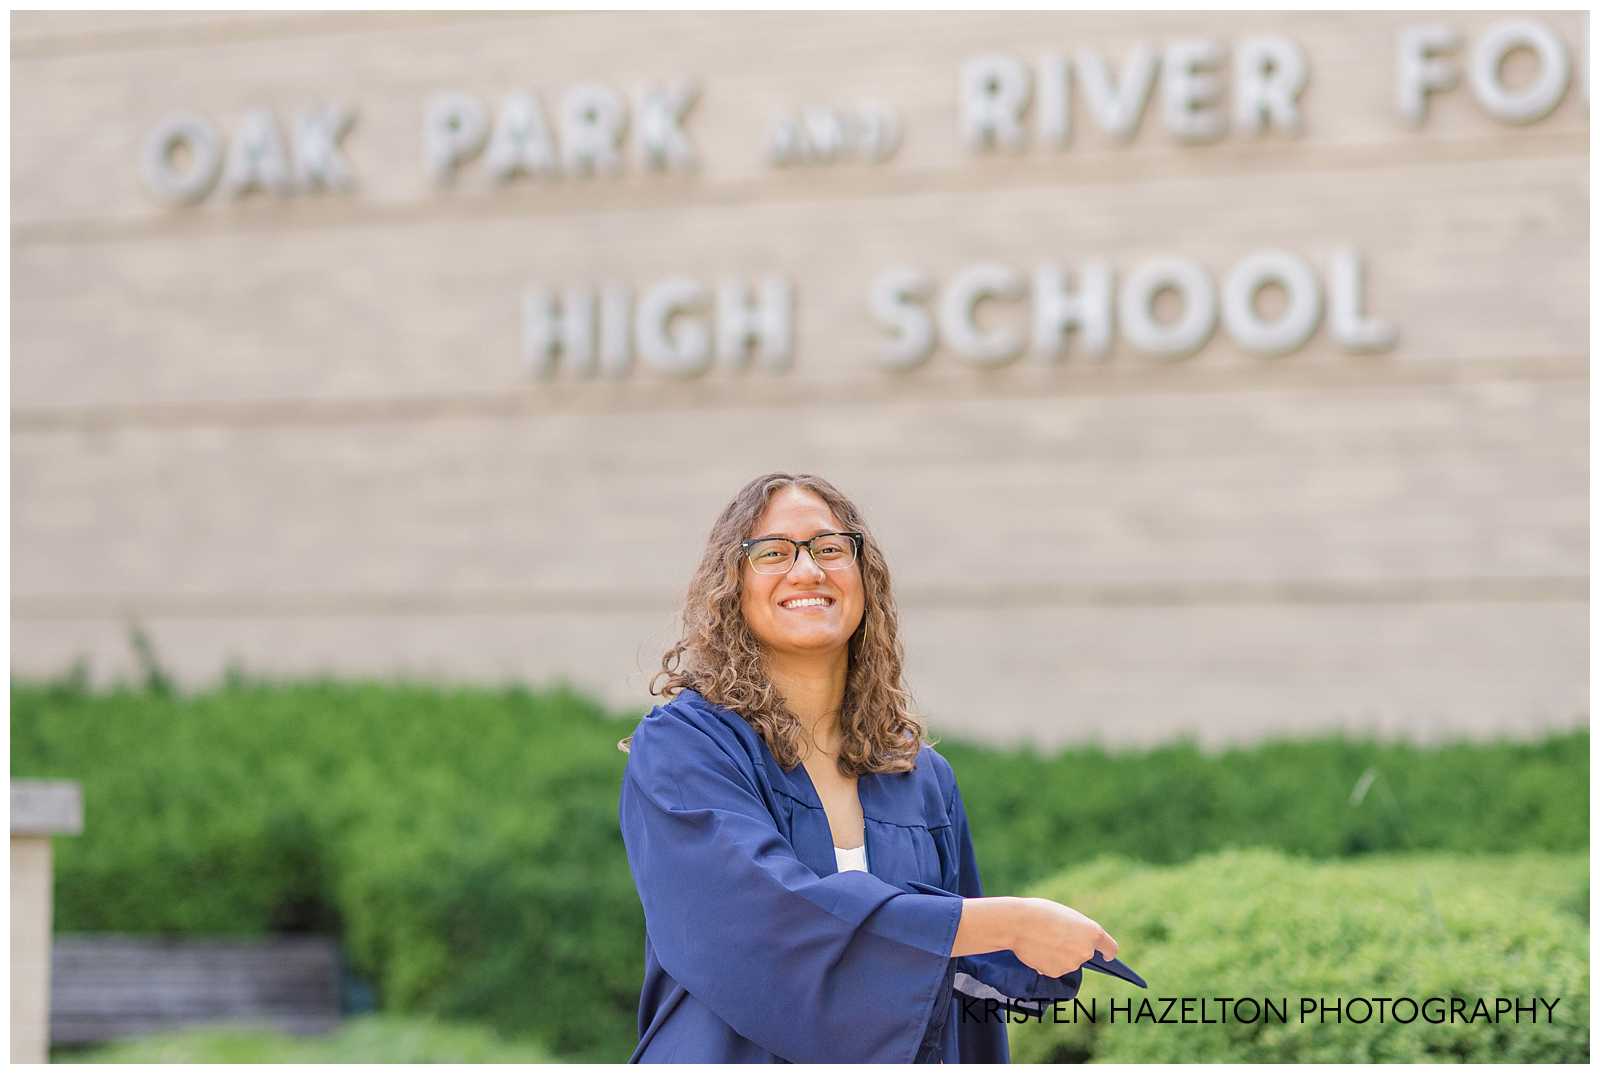 OPRFHS senior about to throw her cap during a graduation cap and gown photoshoot